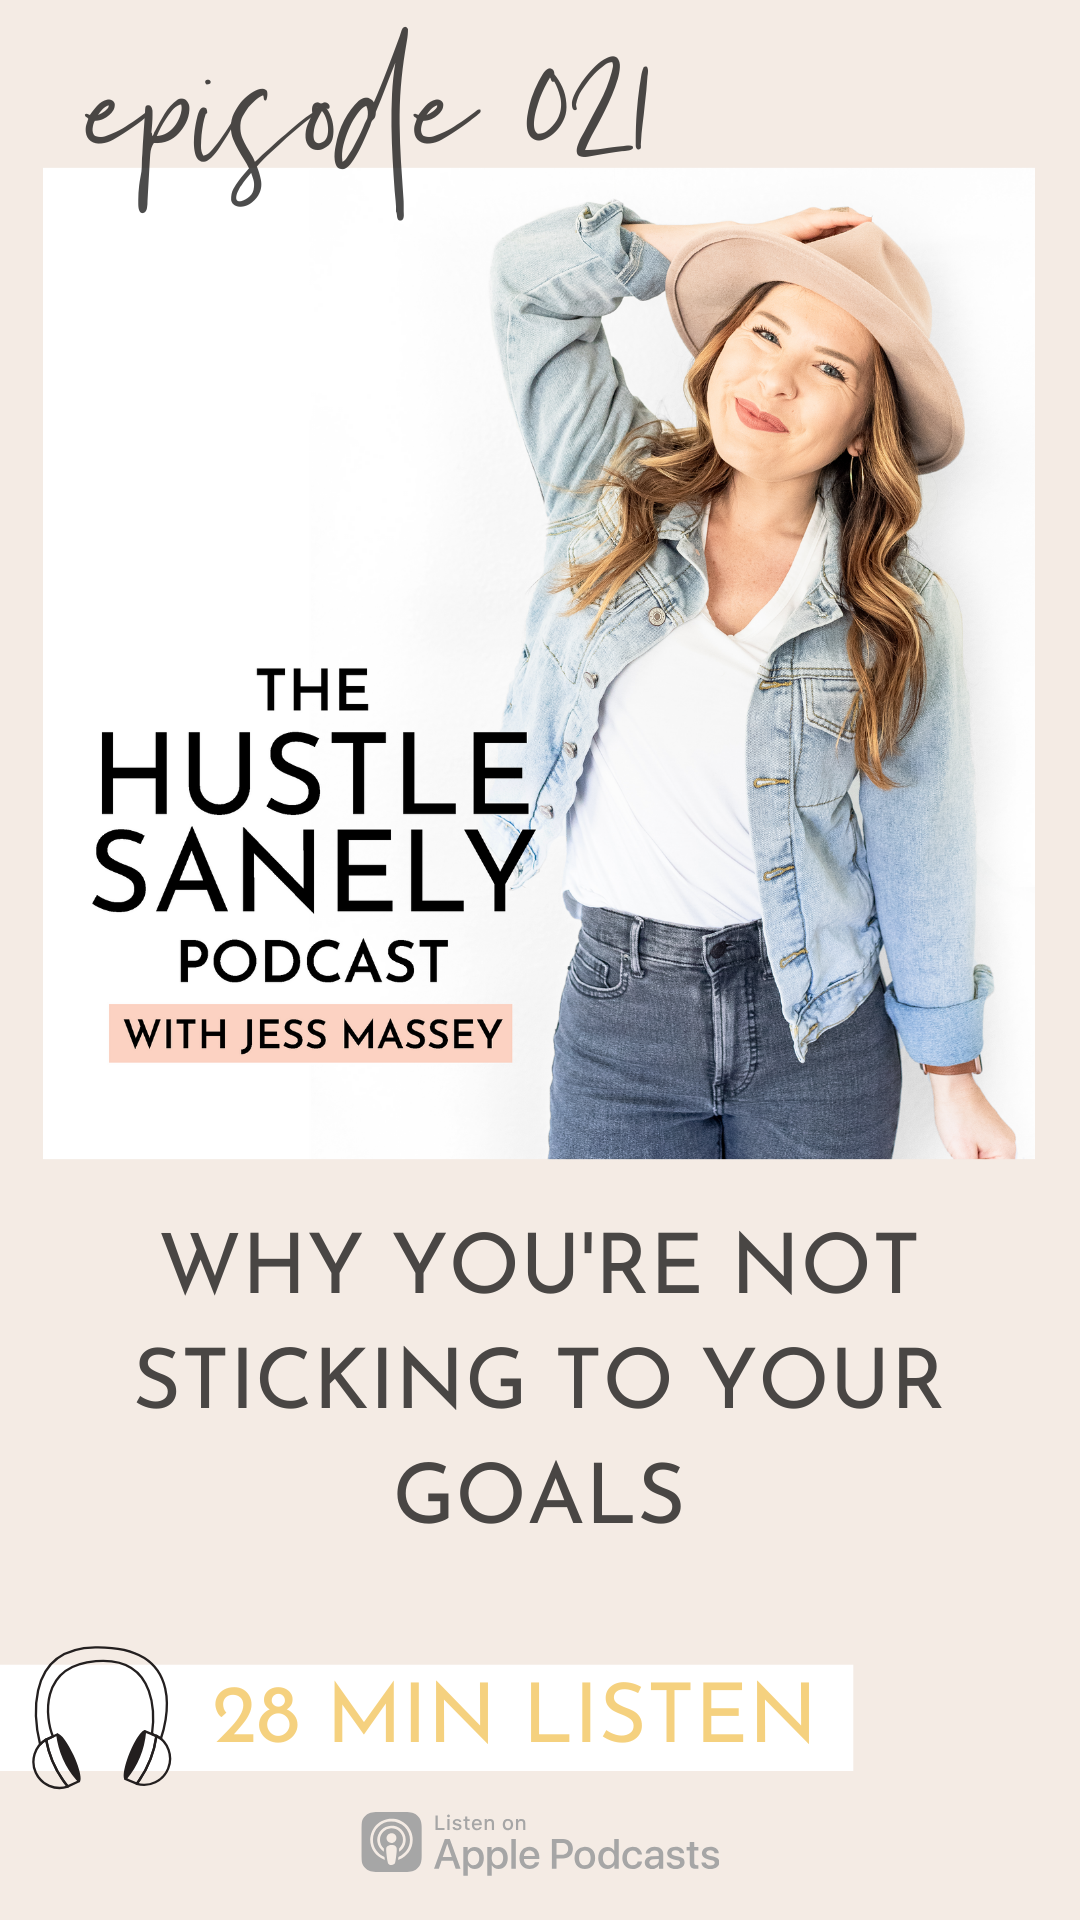 Where the heck is all our change? - The Hustle